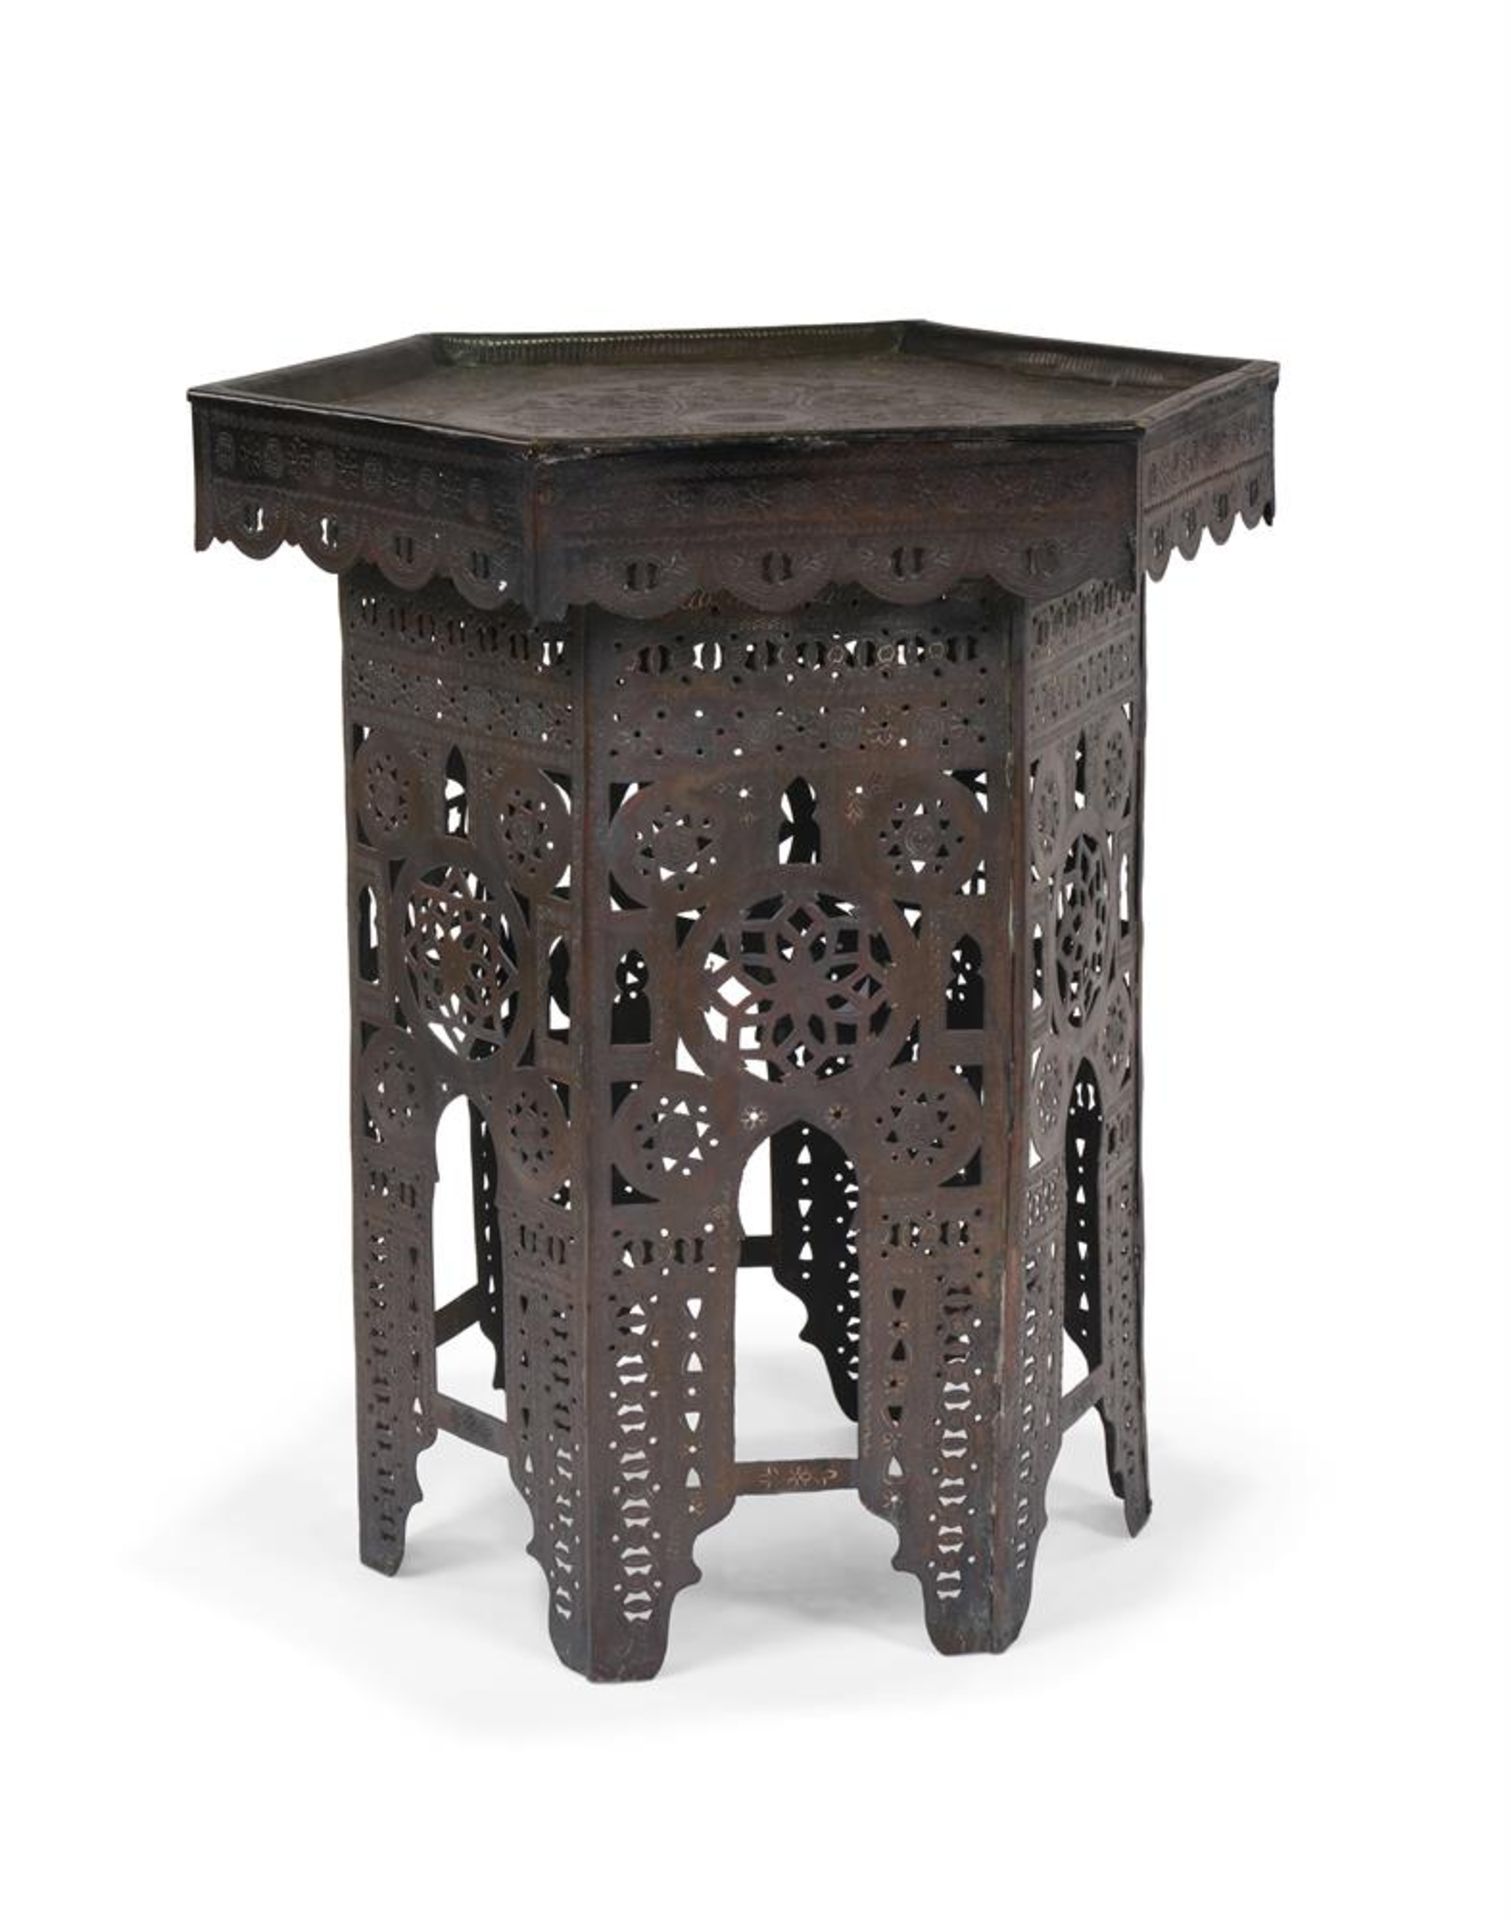 A SYRIAN METAL ALLOY HEXAGONAL OCCASIONAL TABLE, LATE 19TH OR 20TH CENTURY